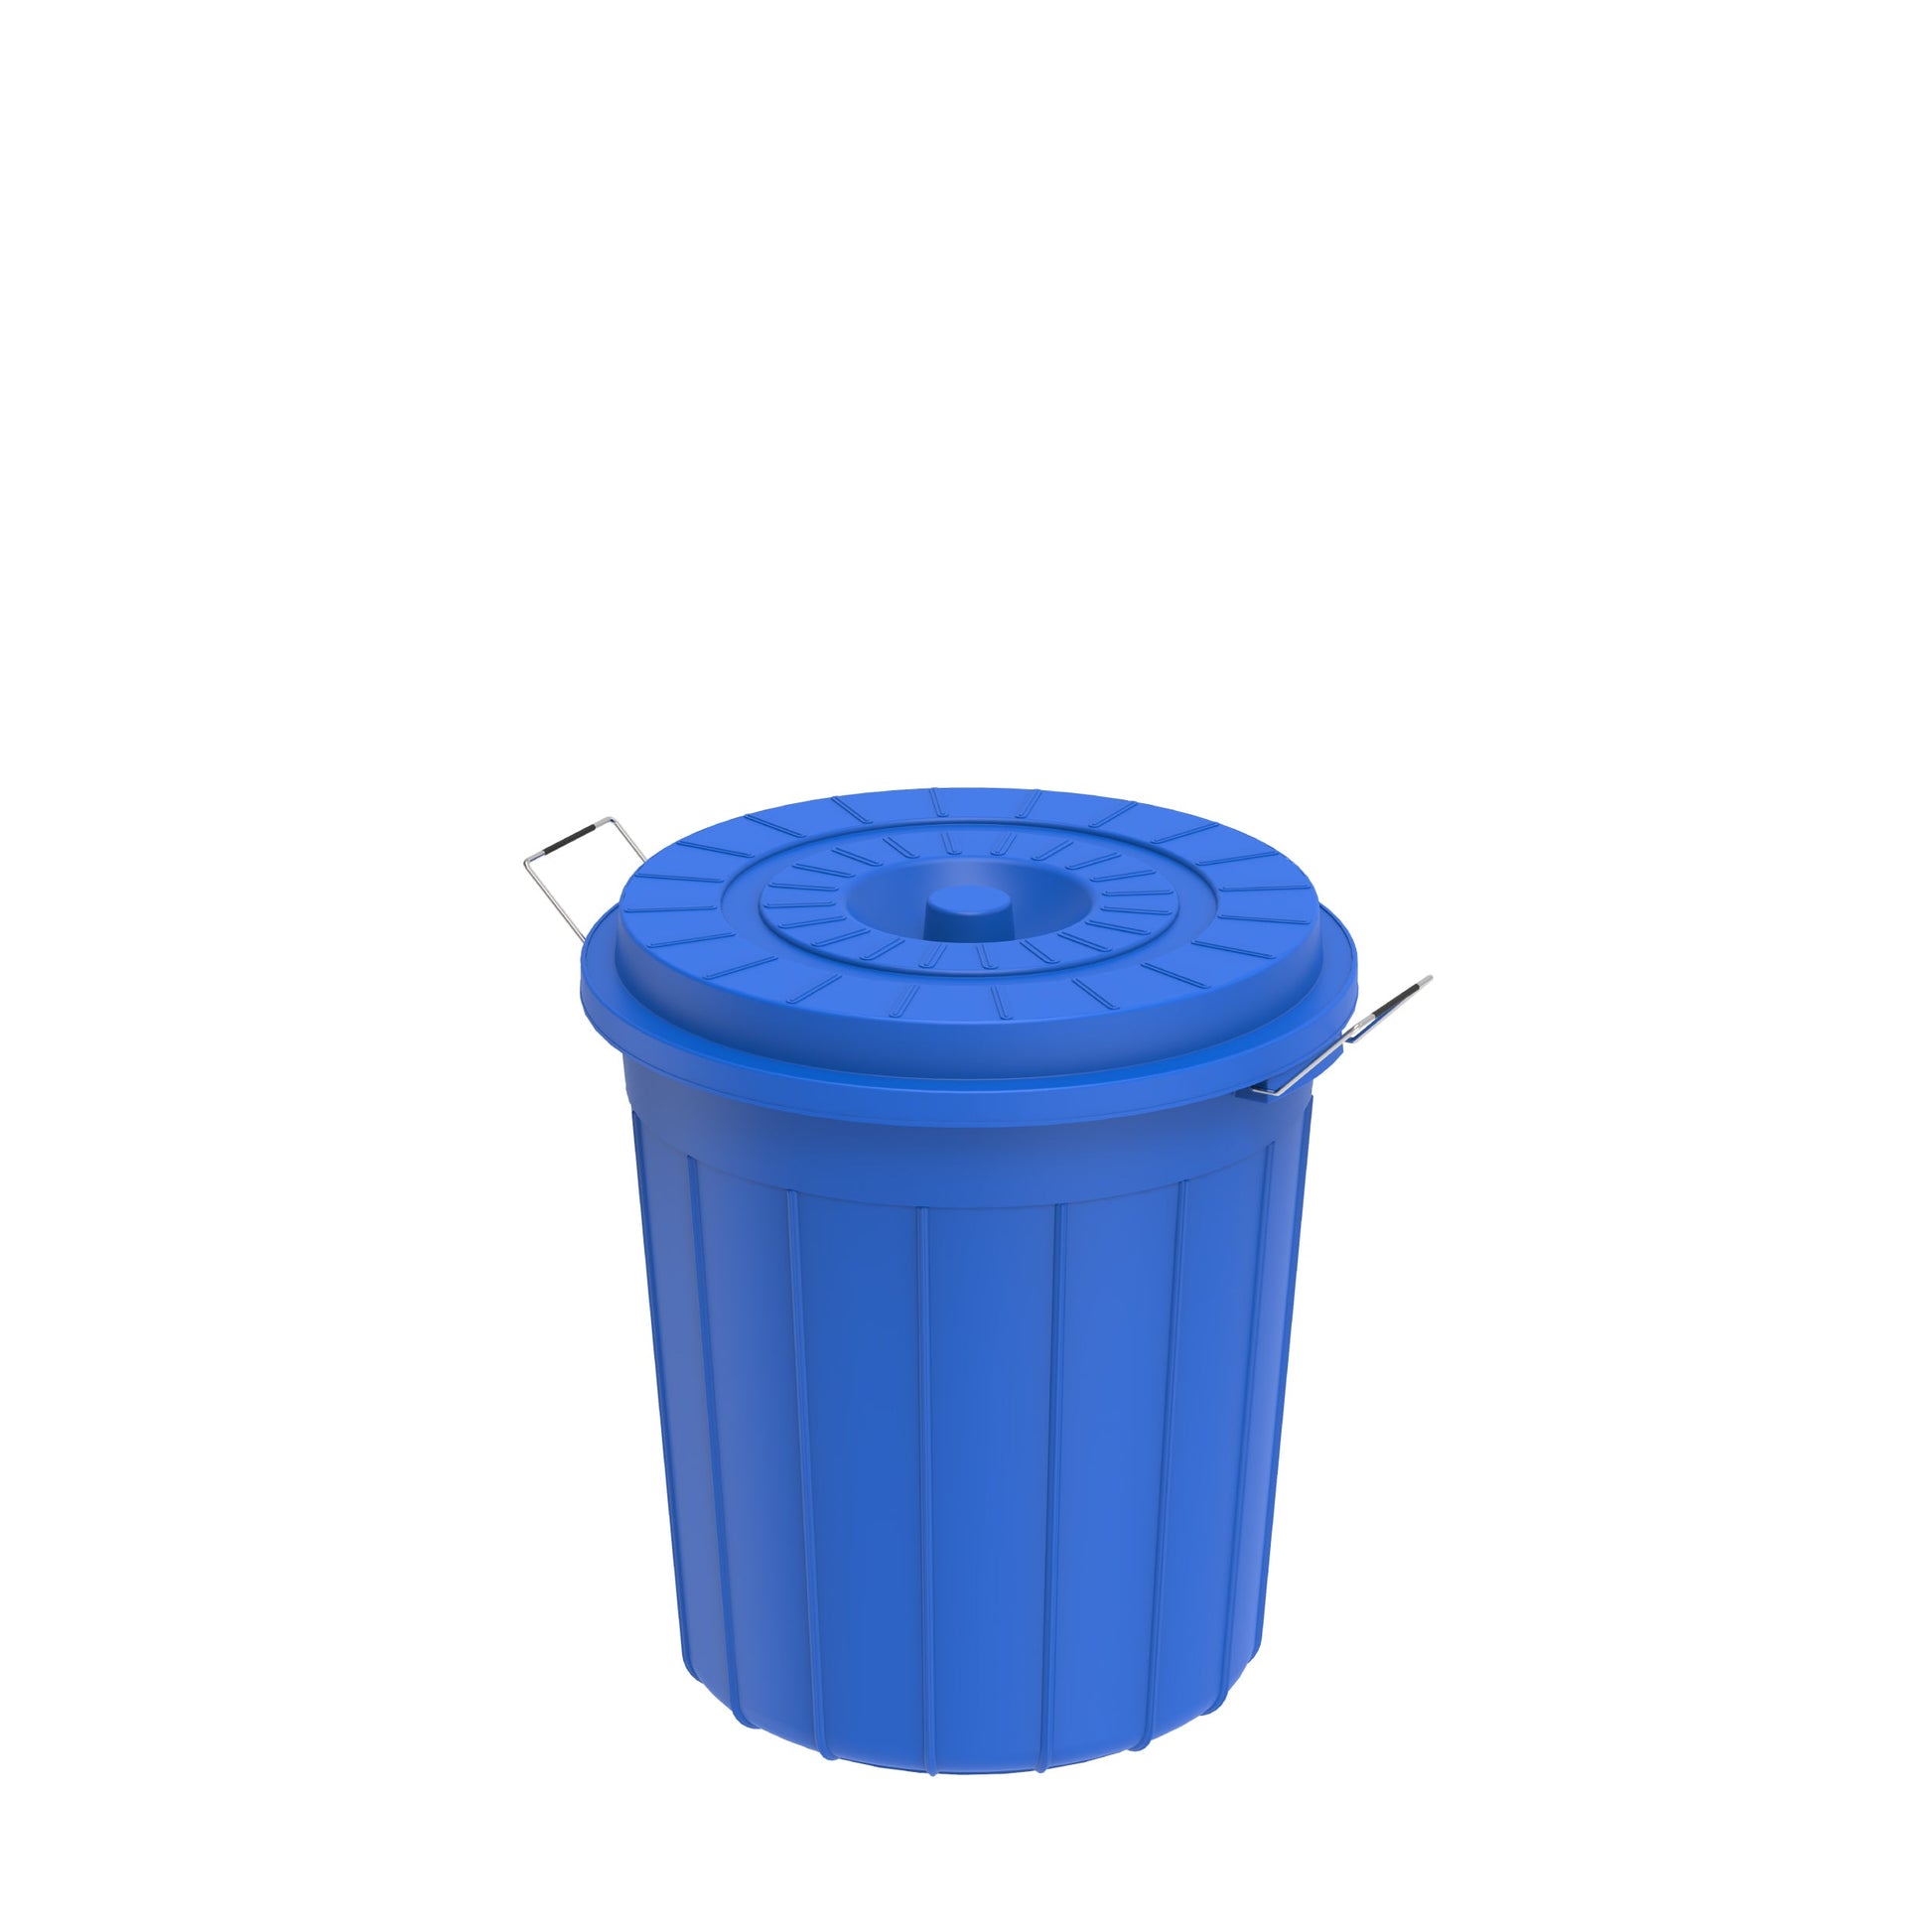 PLASTIC DRUMS WITH LID